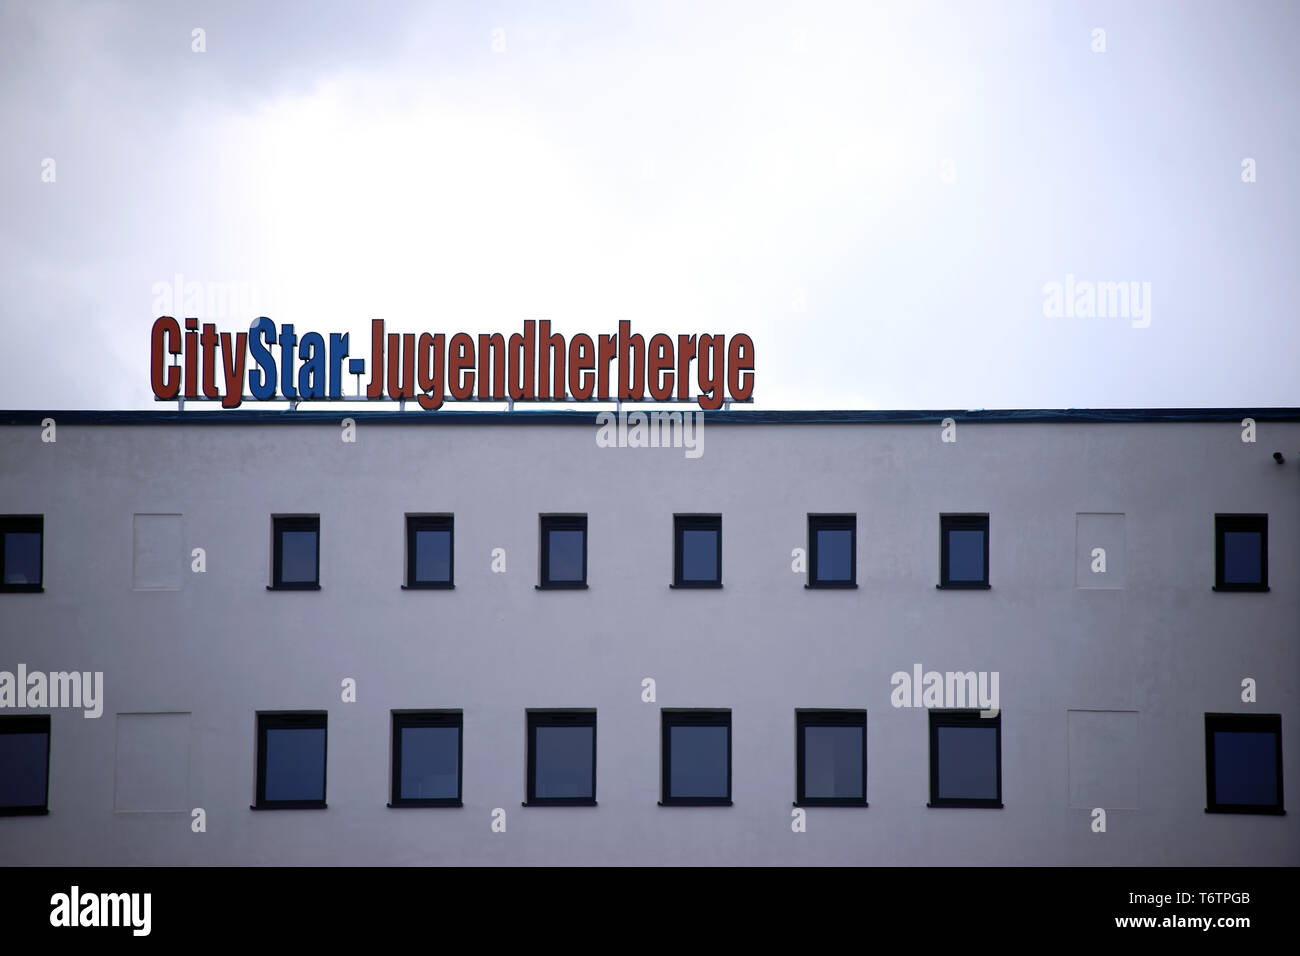 Pirmasens, Germany - March 26, 2019: The facade of the City-Star Youth Hostel with logo on March 26, 2019 in Pirmasens. Stock Photo